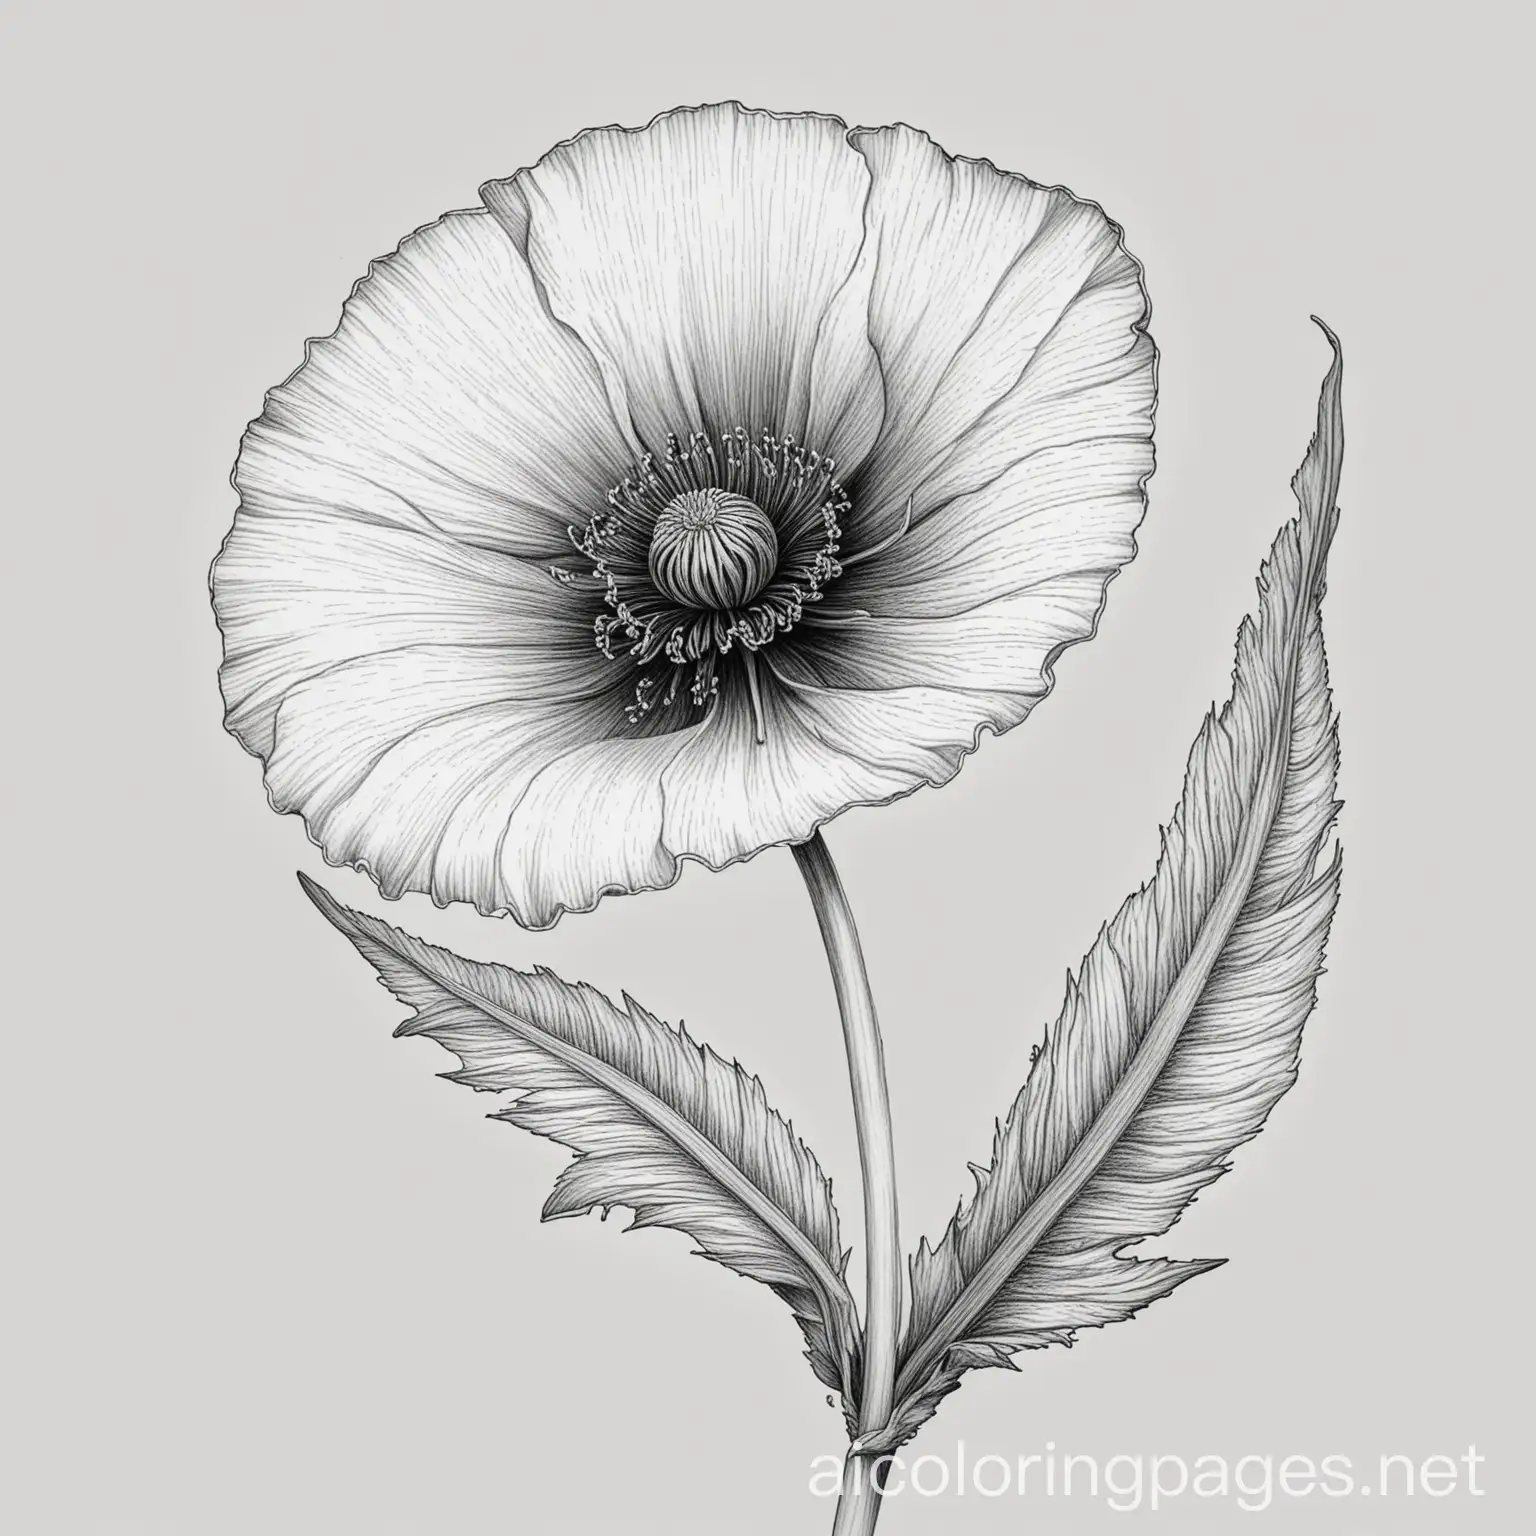 Poppy-Flowers-Coloring-Page-in-Black-and-White-Line-Art